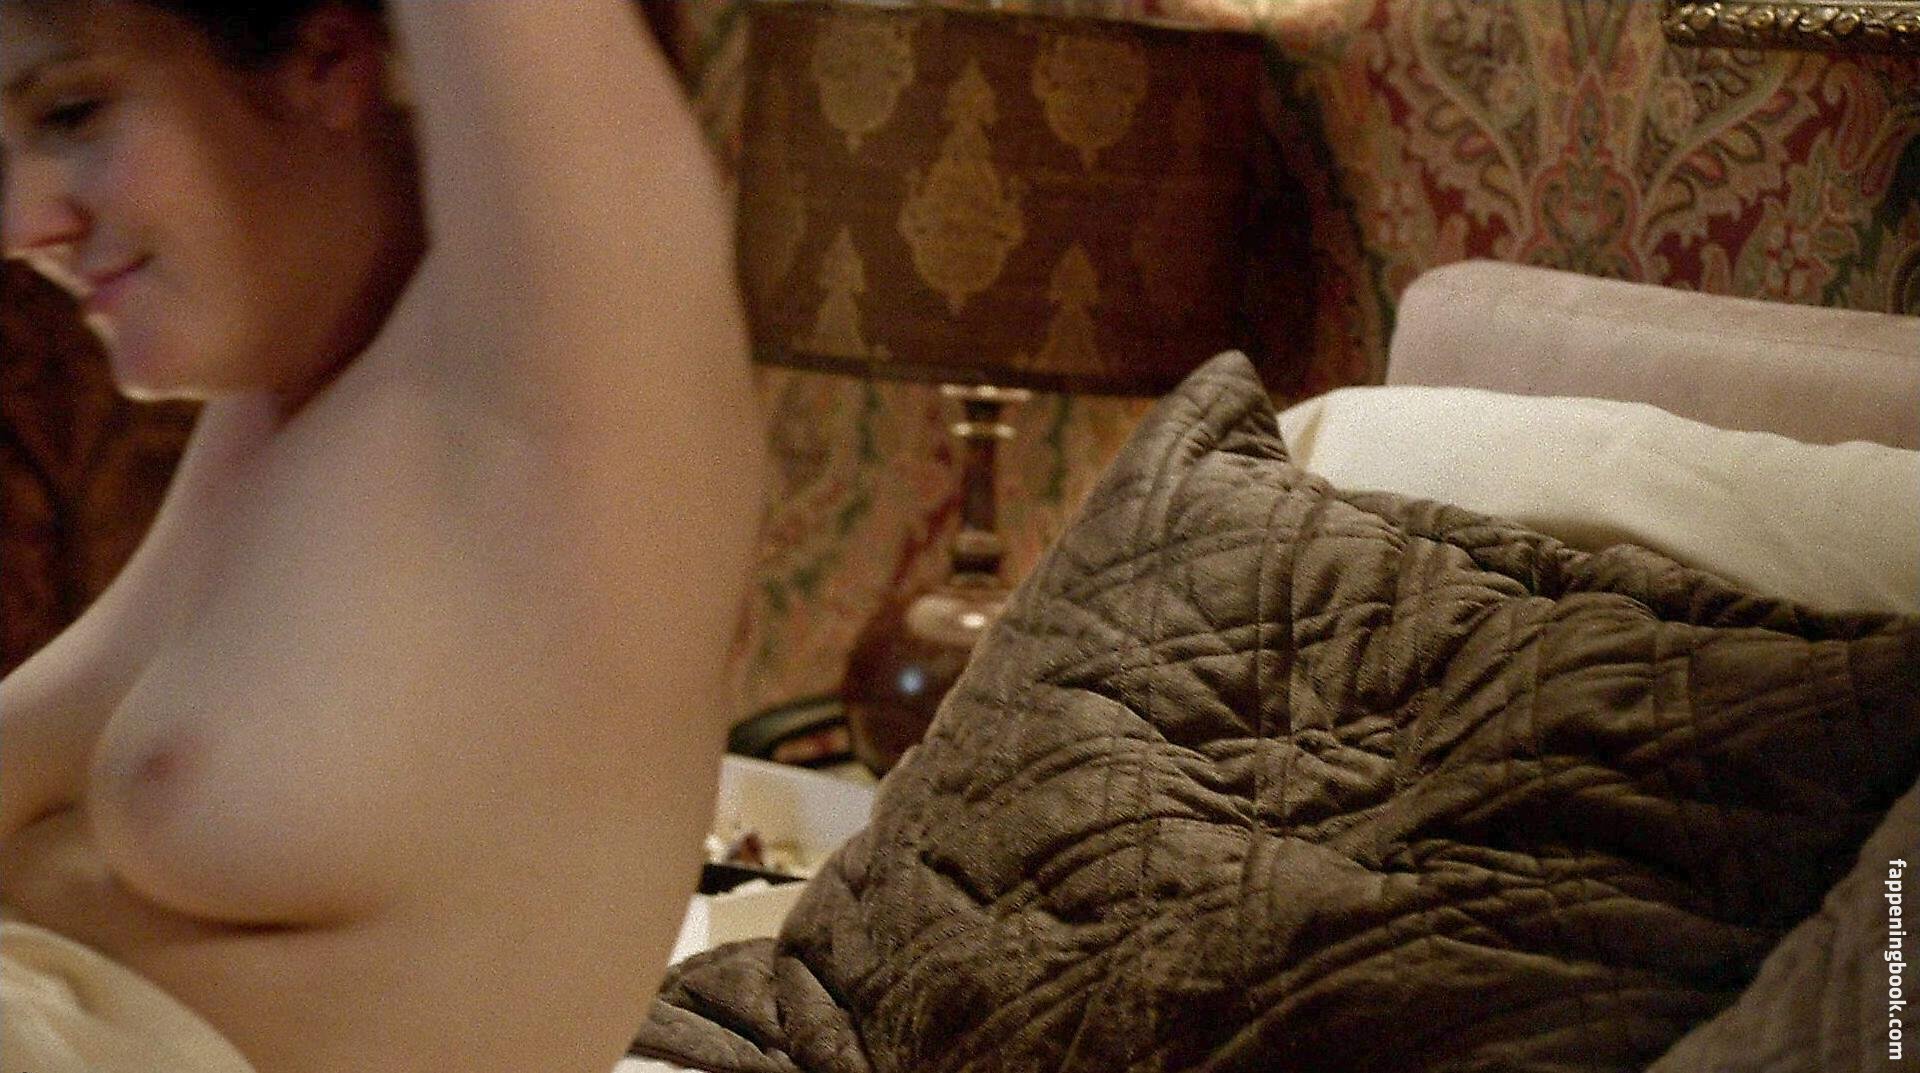 Melanie Lynskey Nude, The Fappening - Photo #380242 - FappeningBook.